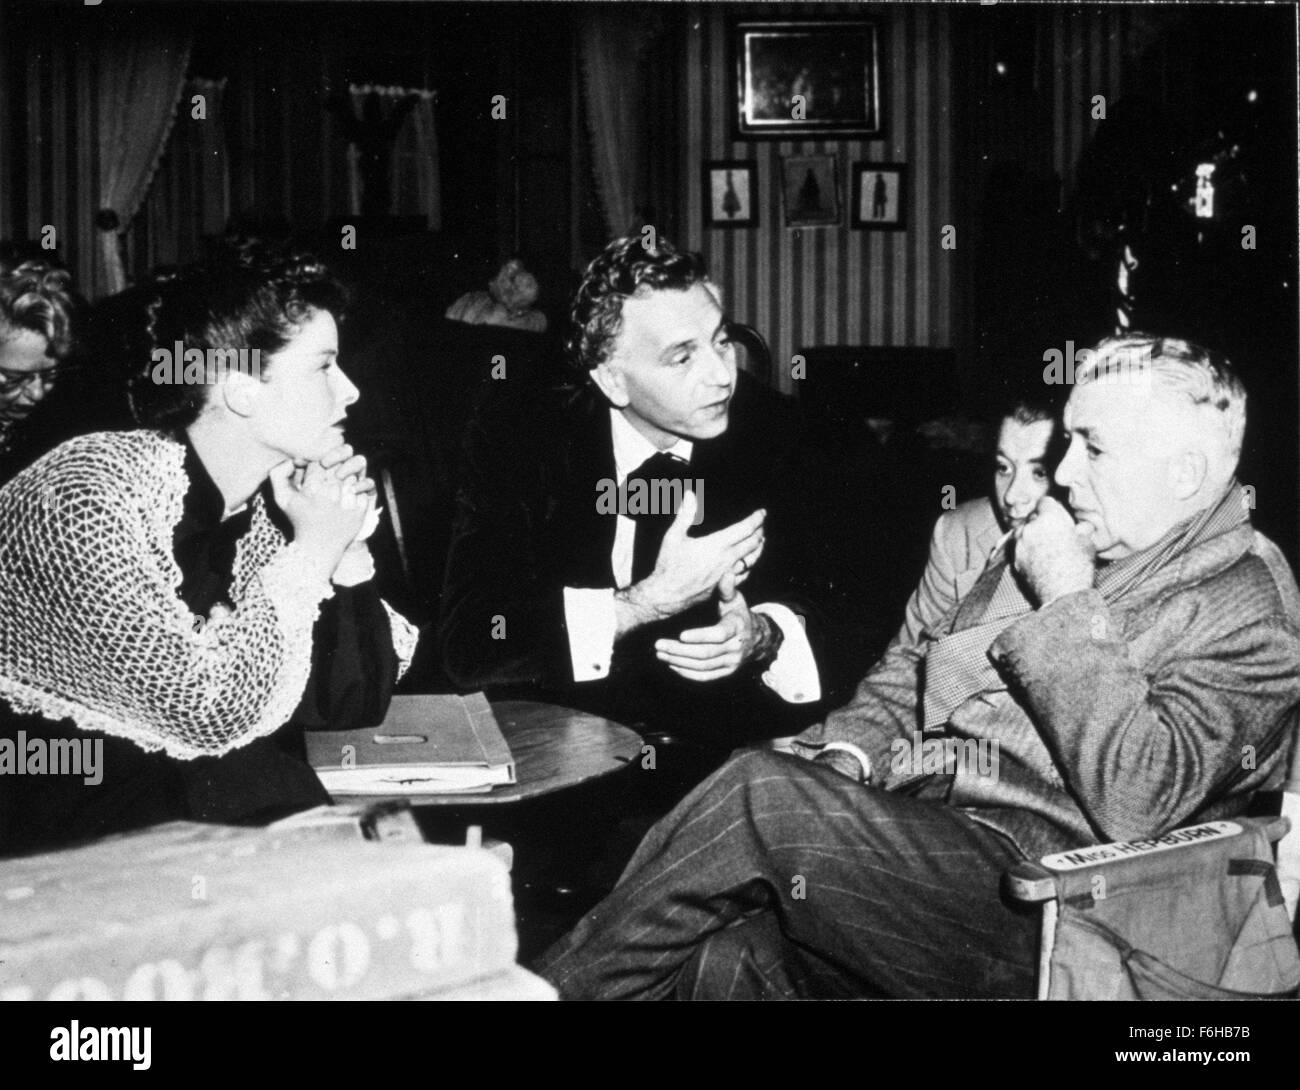 1947, Film Title: SONG OF LOVE, Director: CLARENCE BROWN, Studio: MGM, Pictured: 1947, CLARENCE BROWN, PAUL HENREID, KATHARINE HEPBURN, CULVER CITY, CA. MGM STUDIOS. (Credit Image: SNAP) Stock Photo